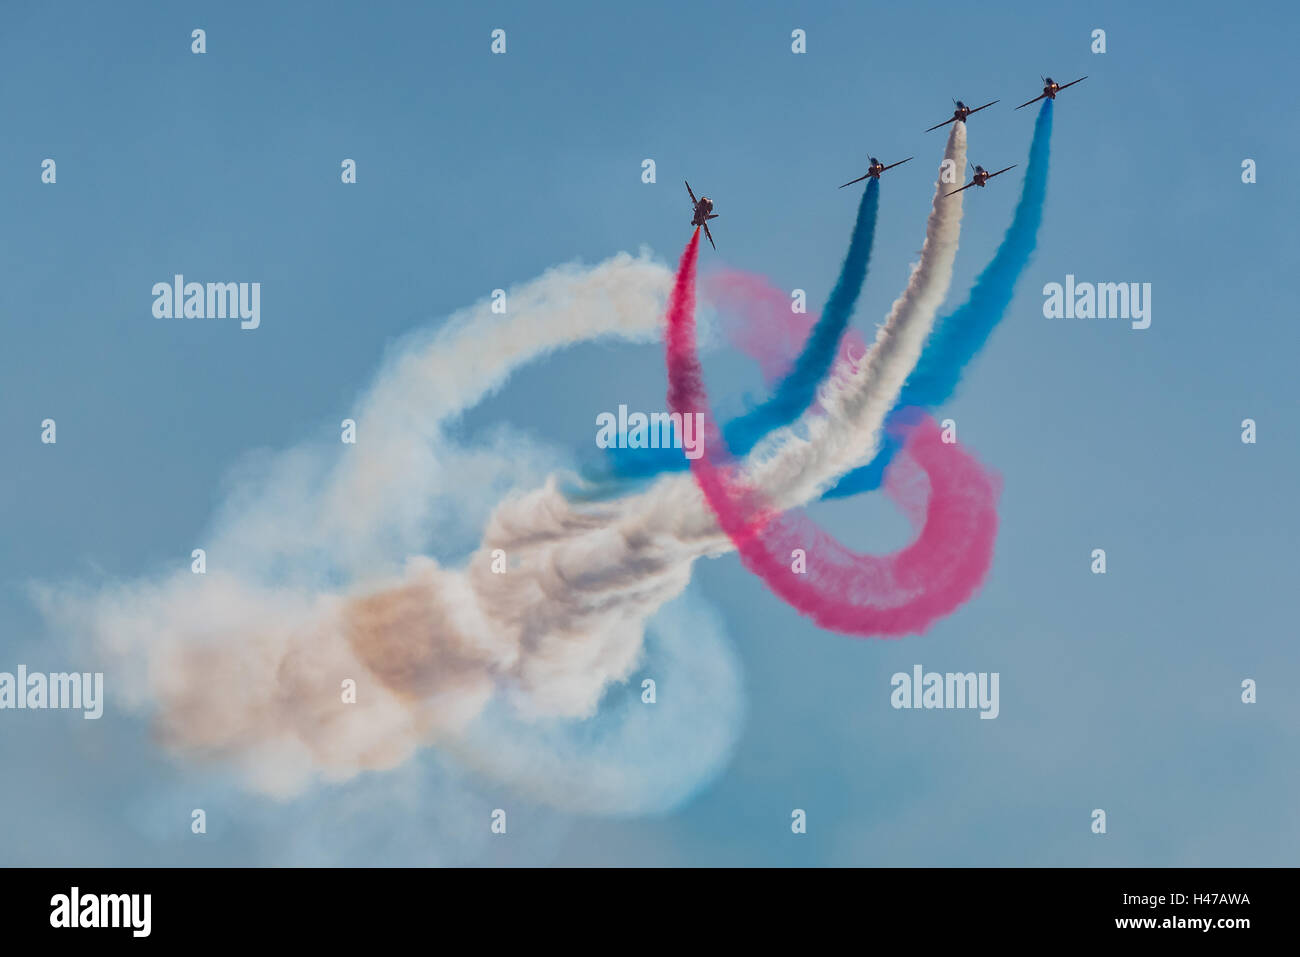 Part of the RAF Red Arrows display team's routine at Duxford airshow. Stock Photo